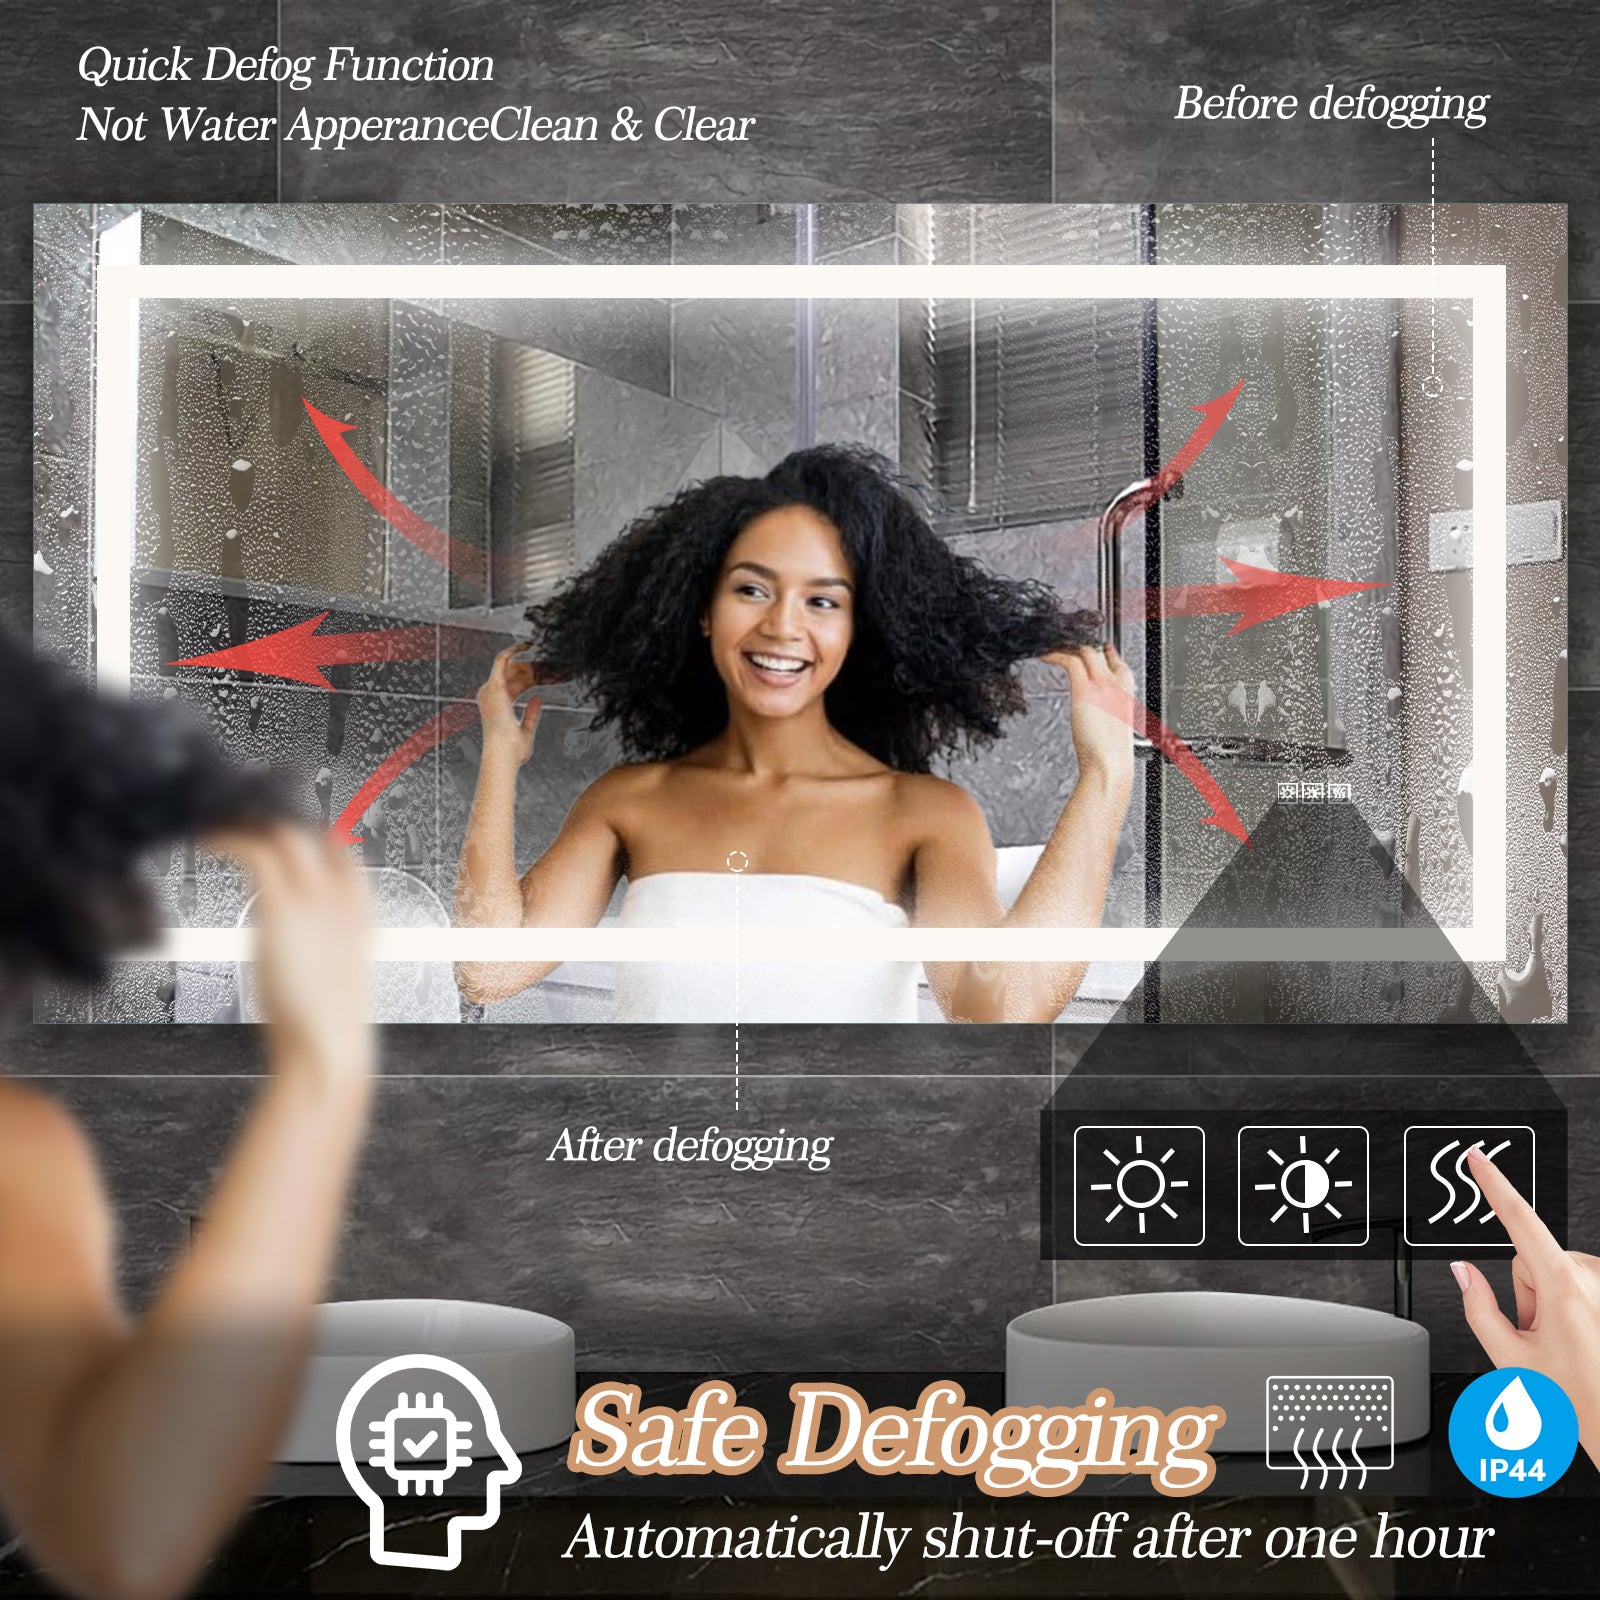 60" x 32" LED Bathroom Vanity Mirror with Touch Control Anti-Fog & Dimming